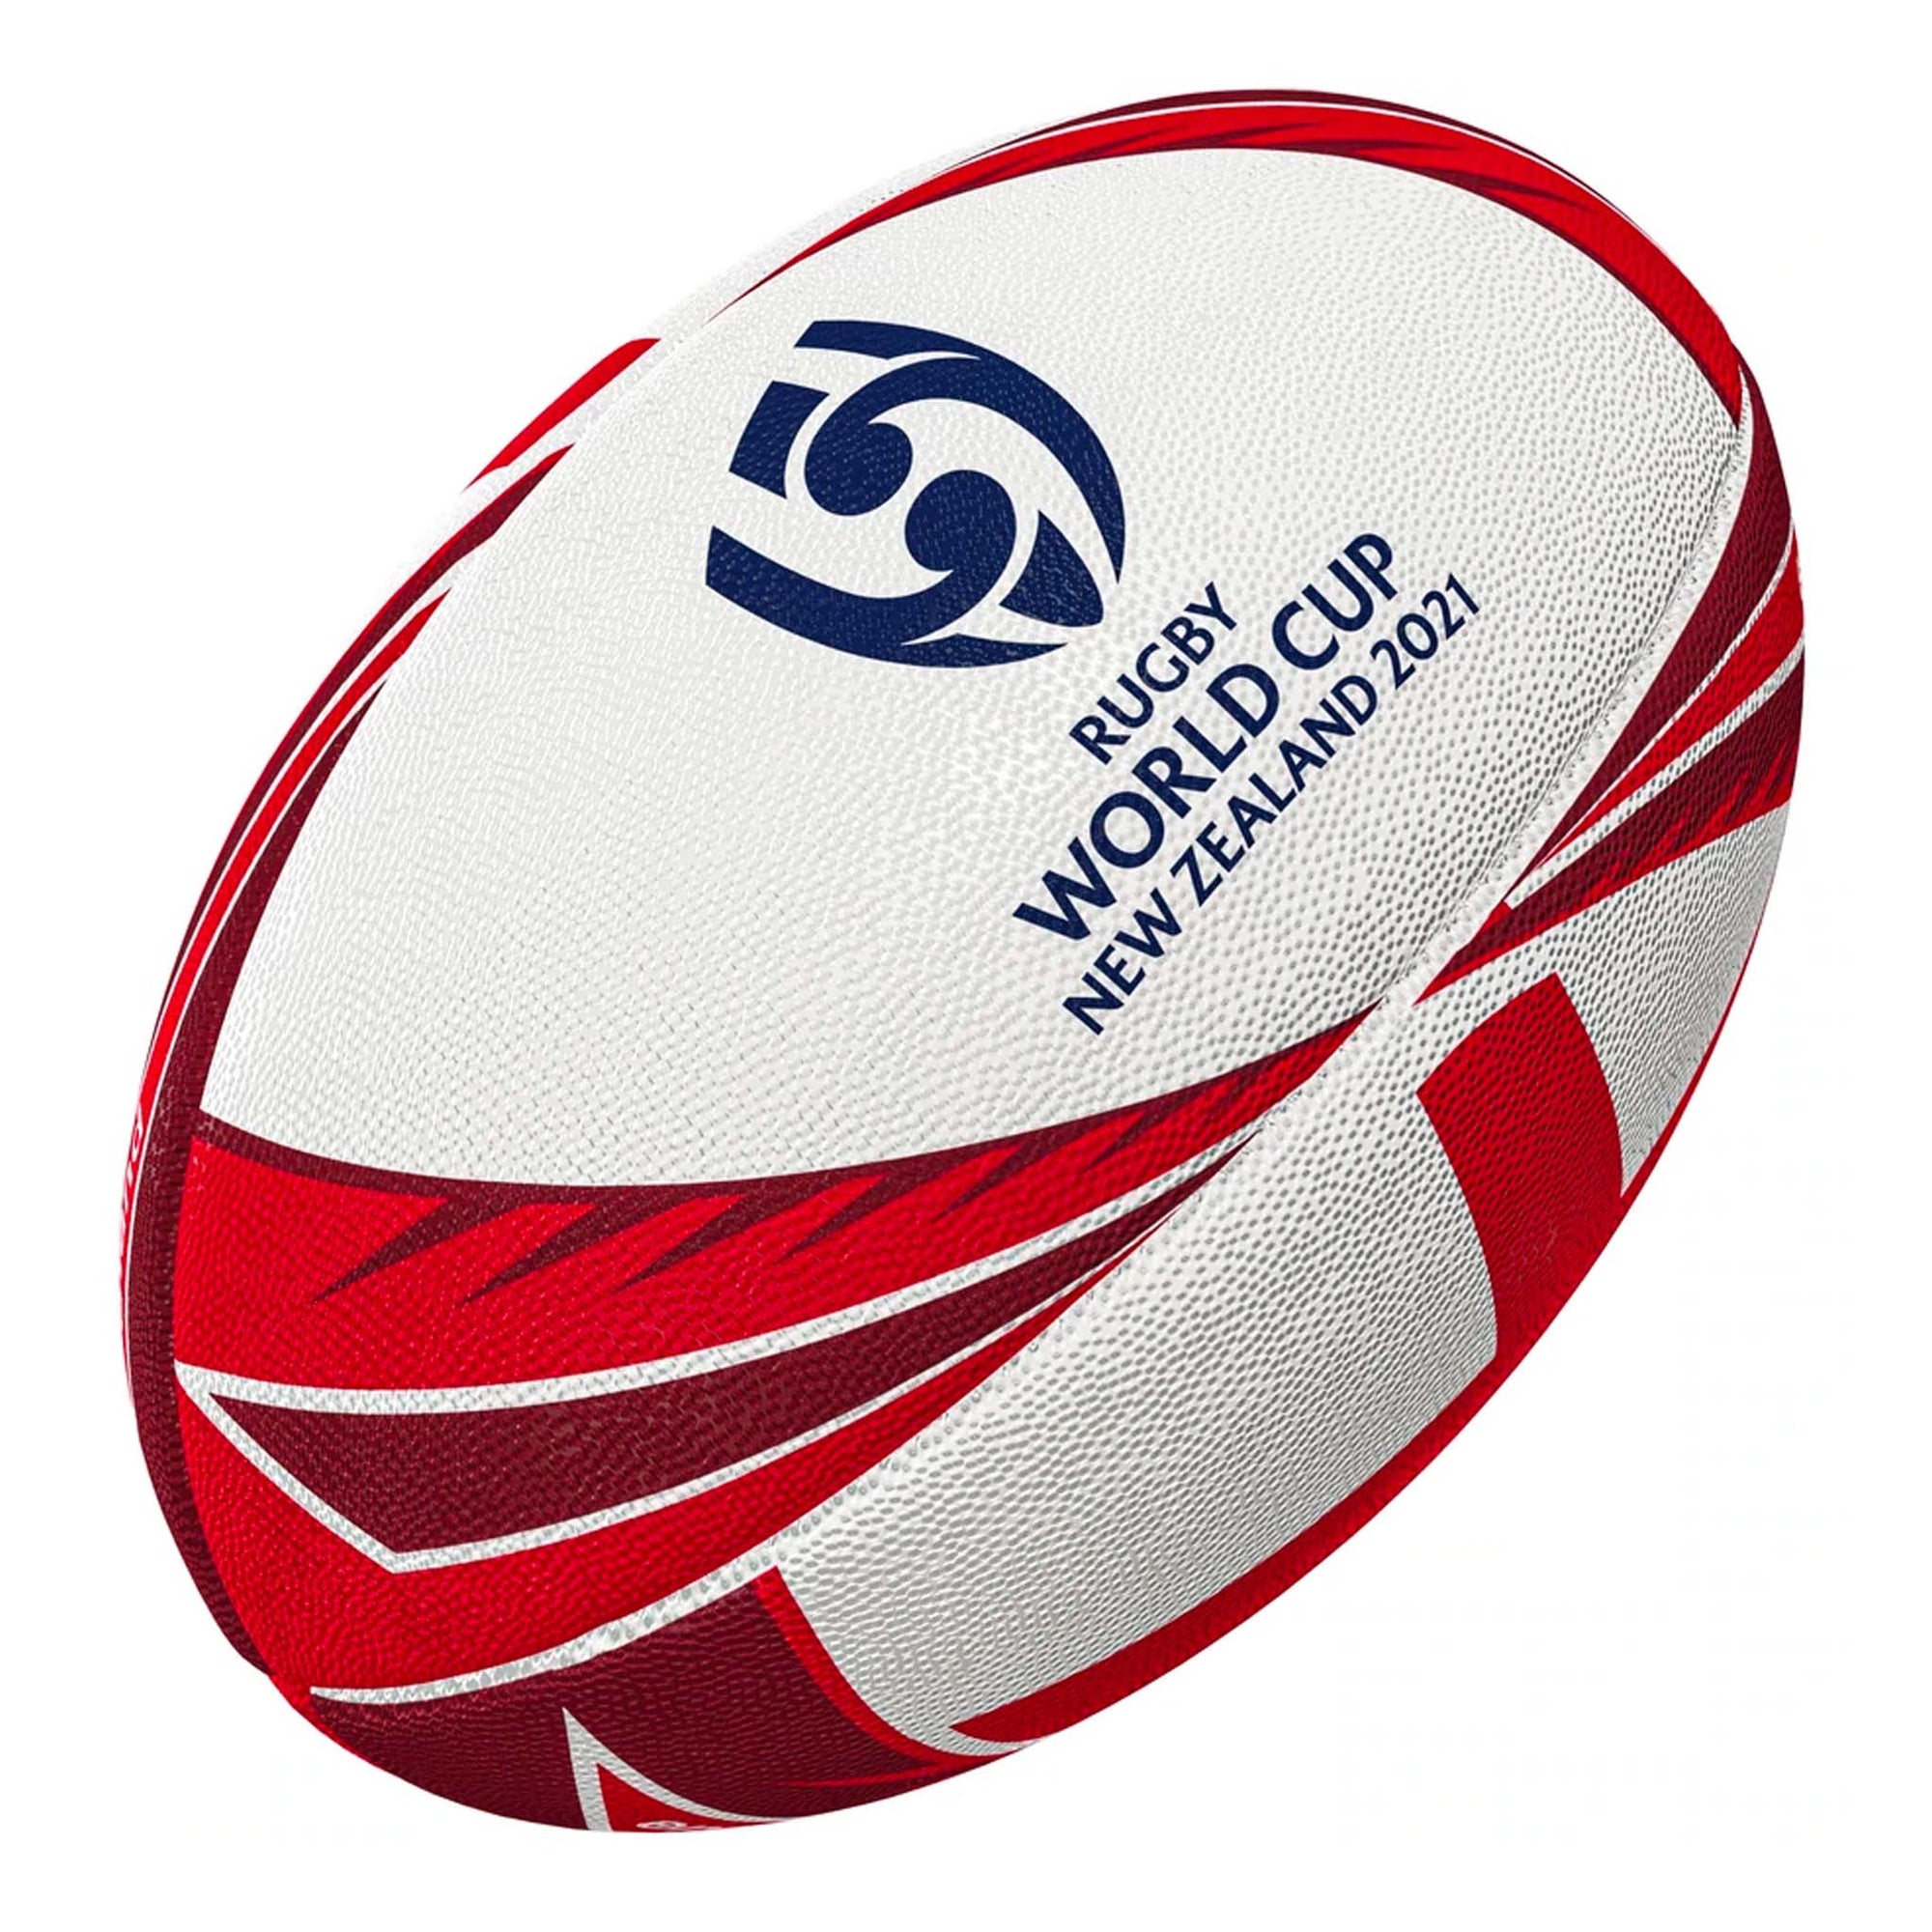 Rugby Imports Gilbert Rugby World Cup 2021 England Ball